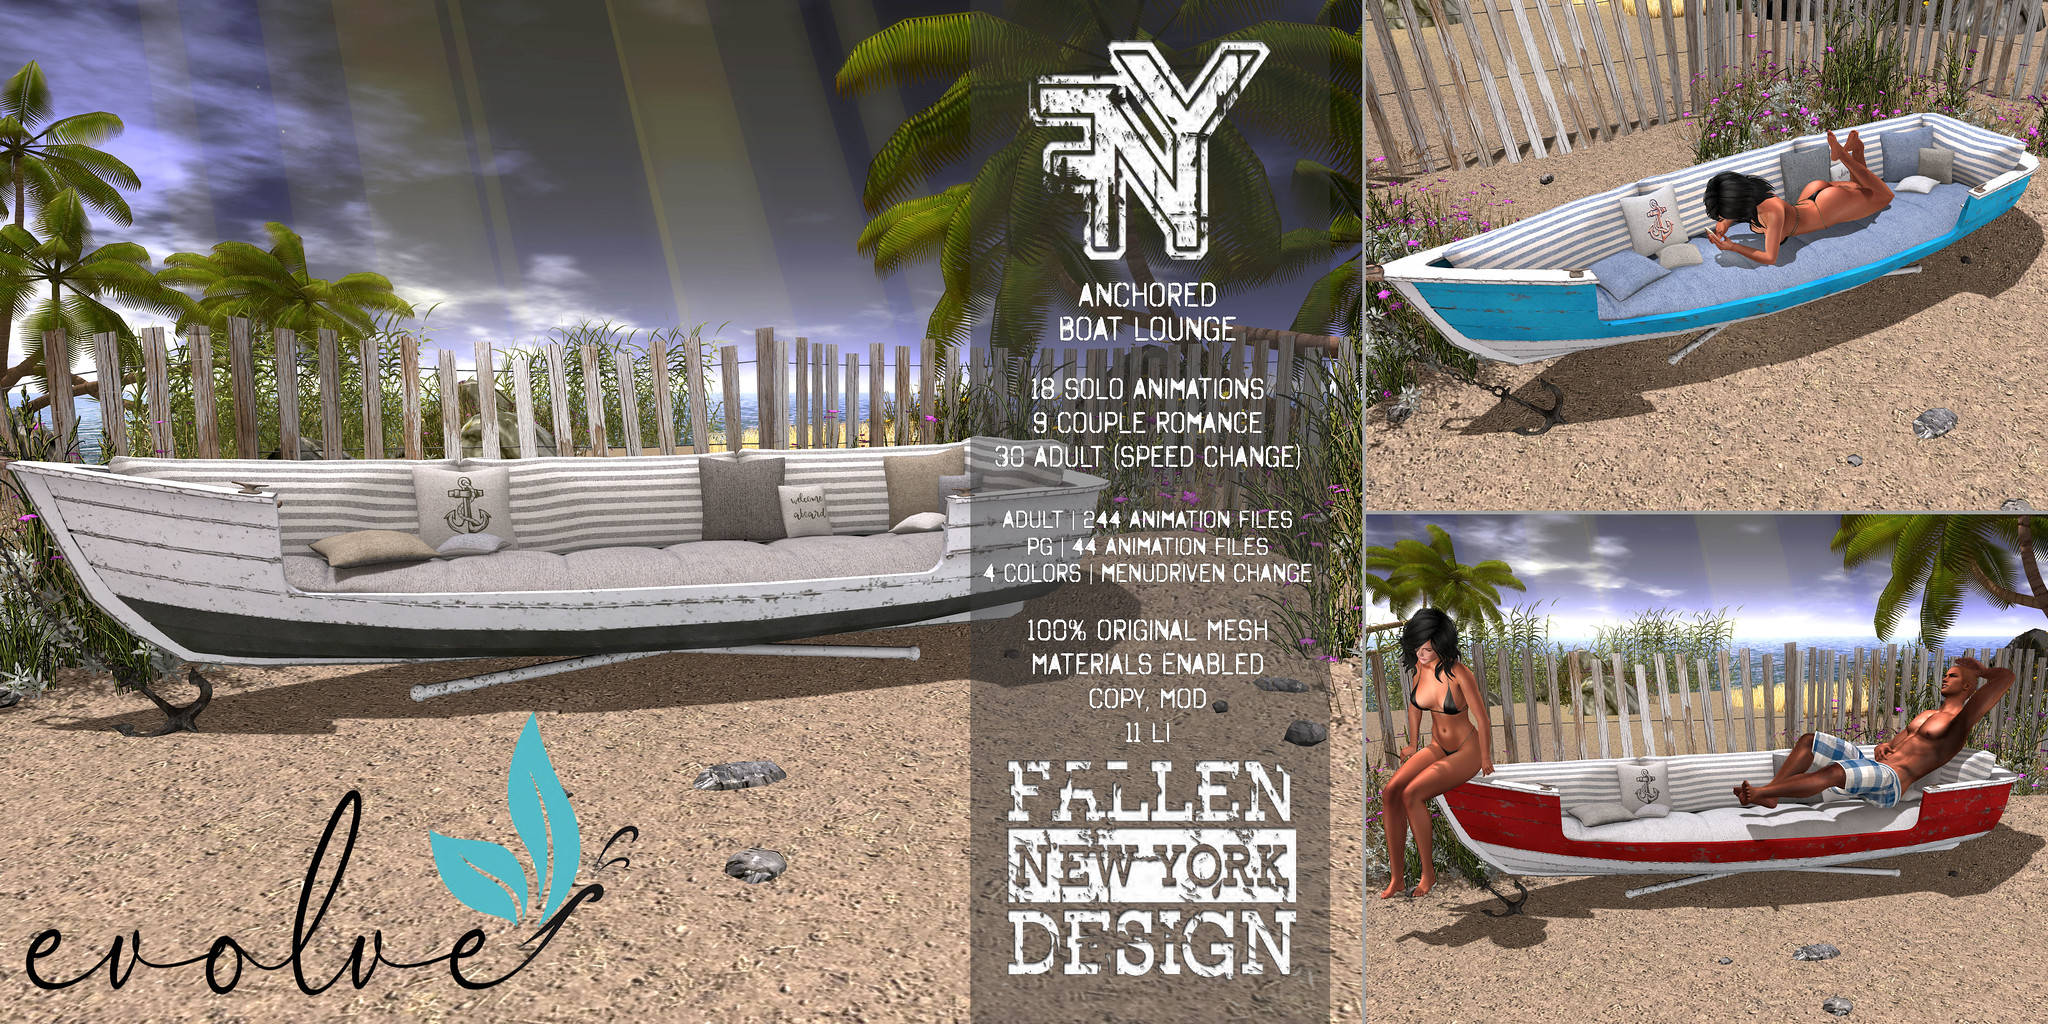 FNY Designs – Anchored Boat Lounge